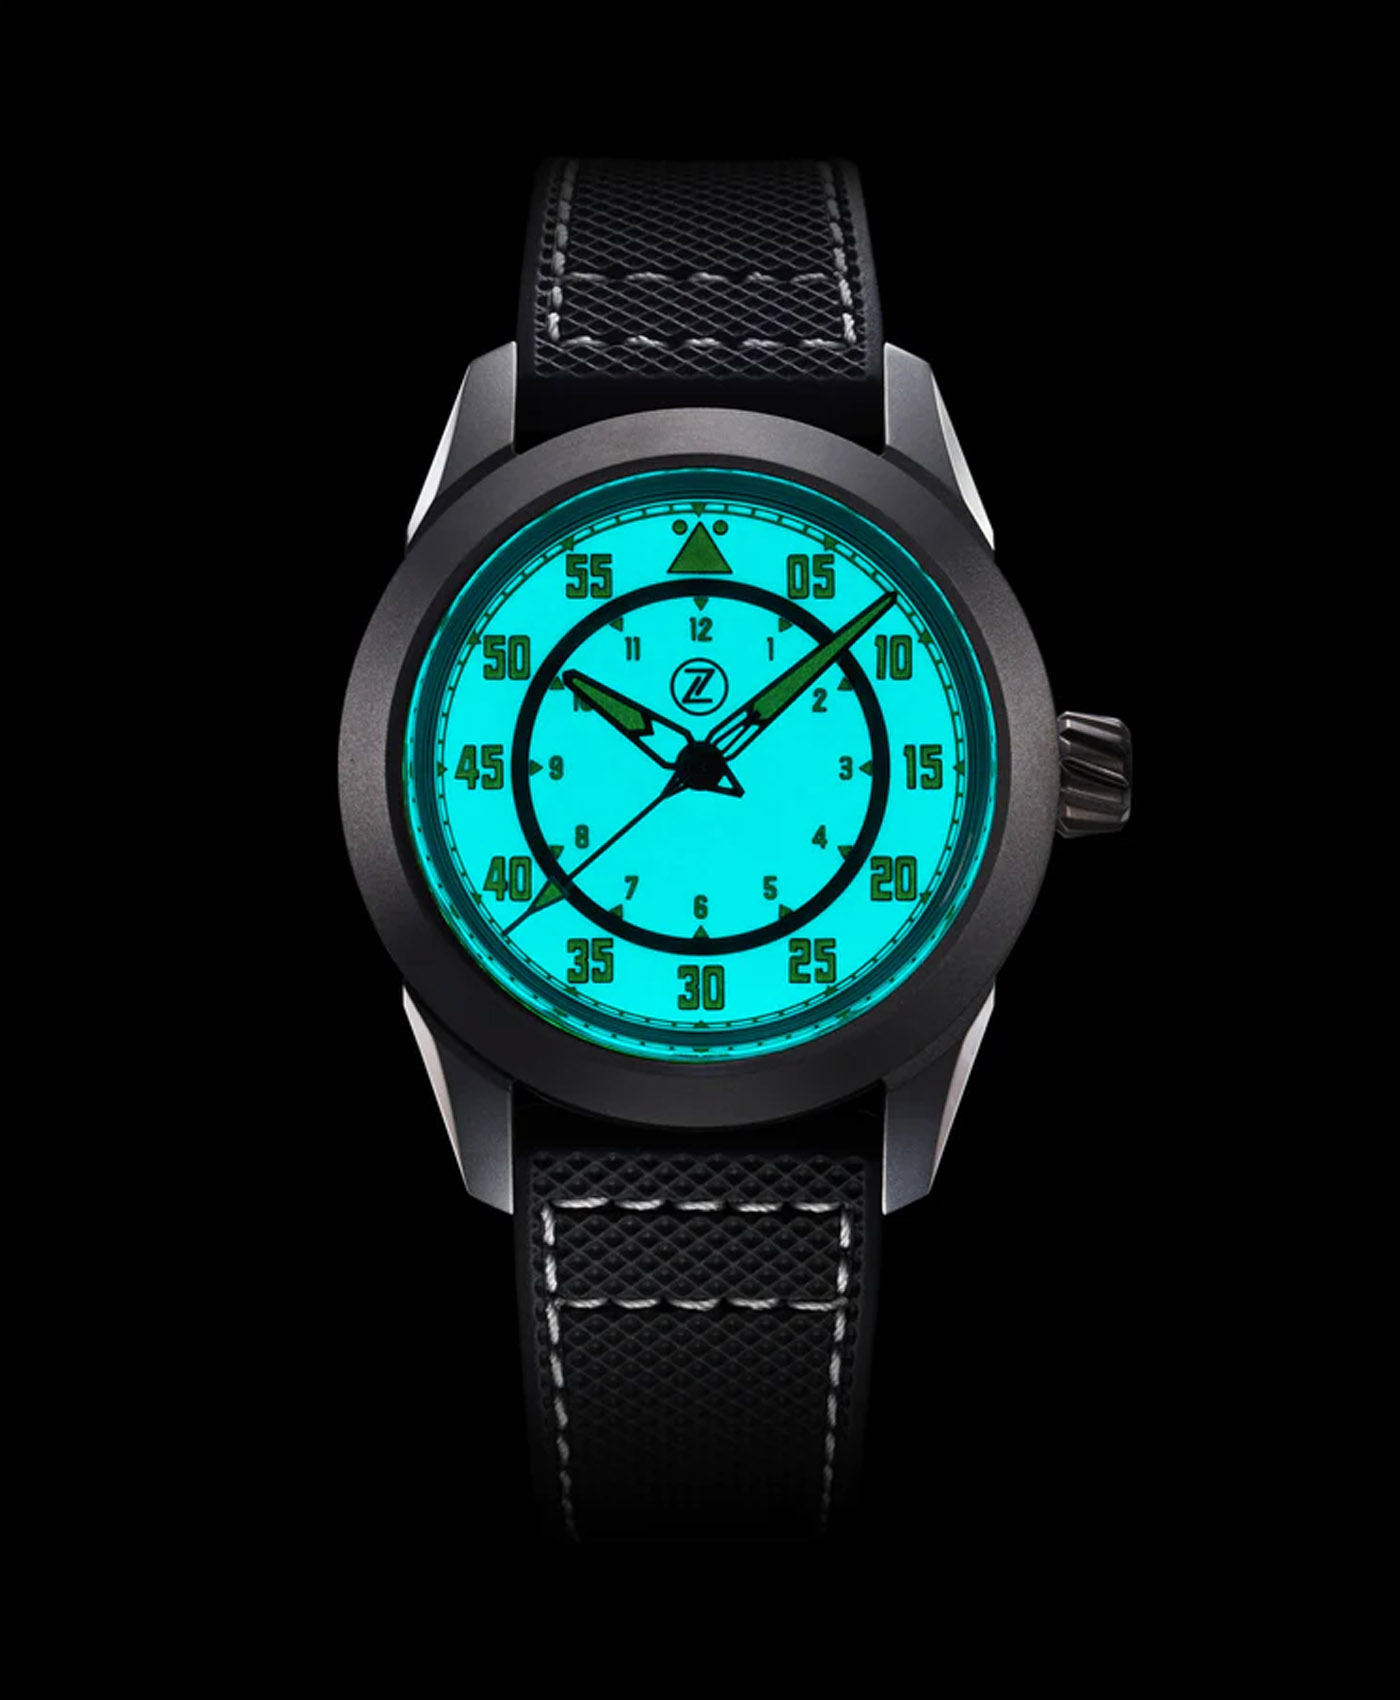 INTRODUCING: The Zelos Watches Blacktip 200m is one of the best